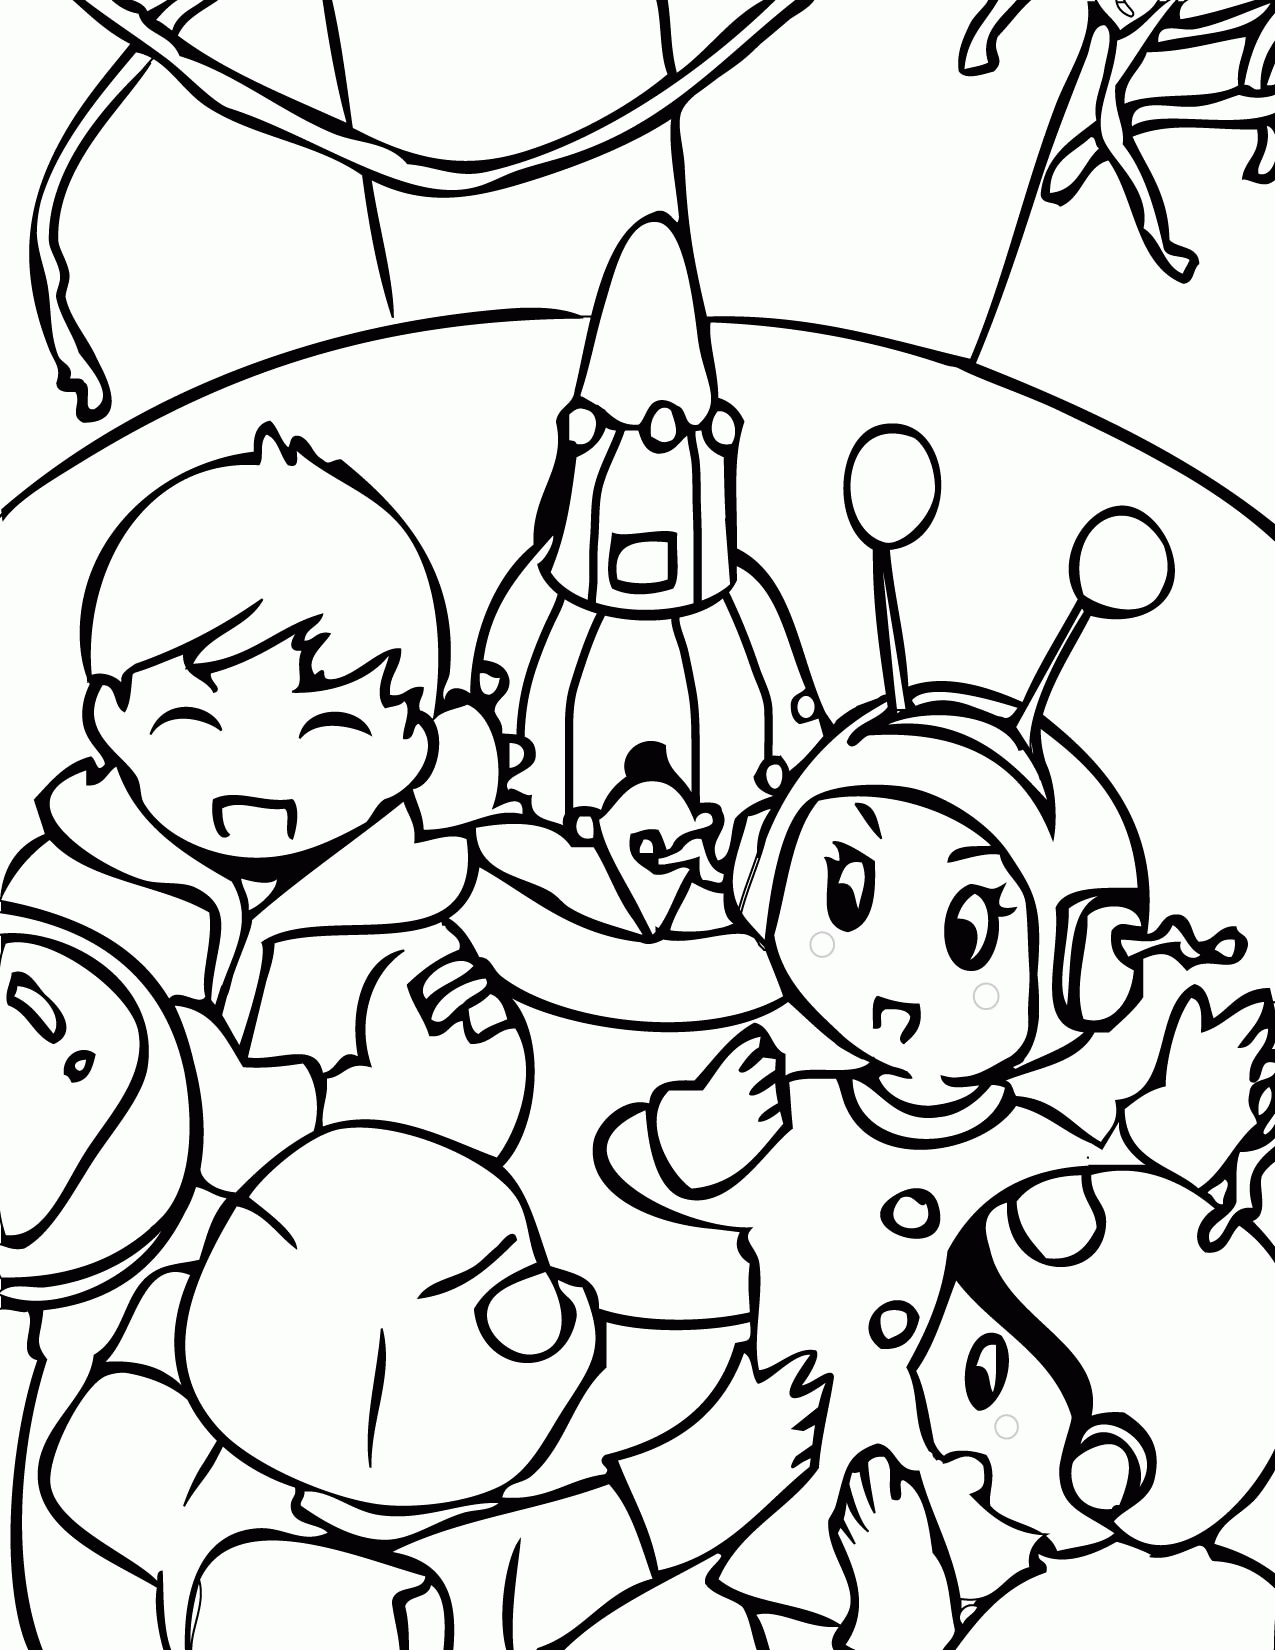 space-coloring-page-0096-q1